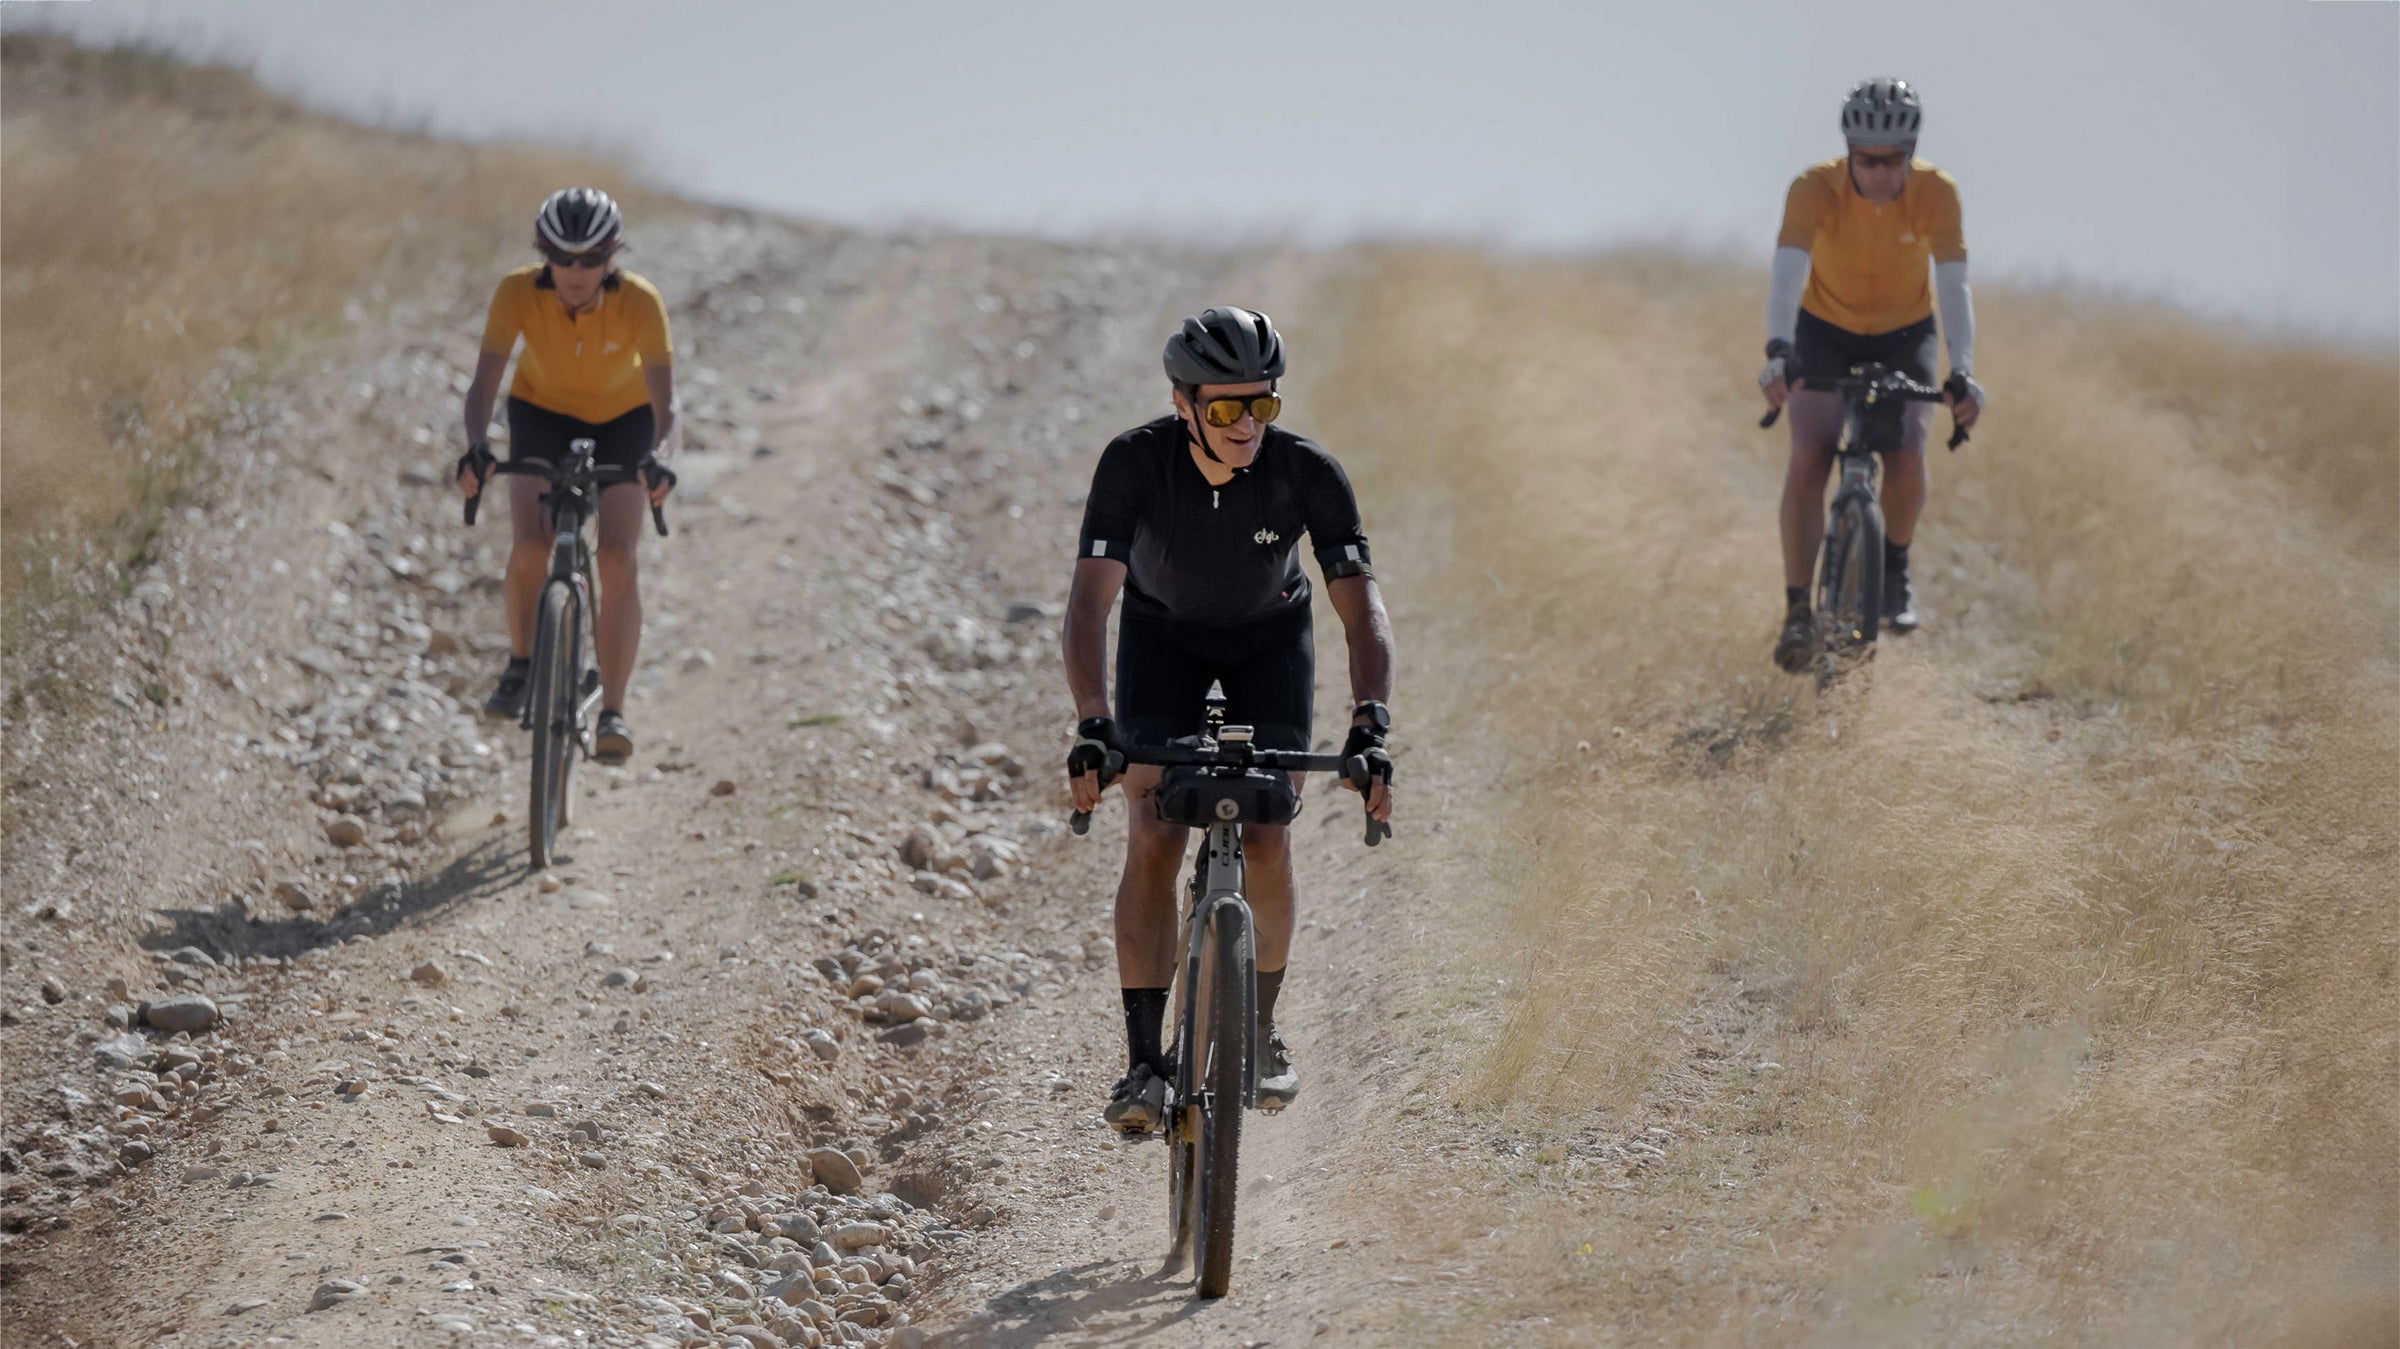 Sigr gravel cycling clothing born of the road